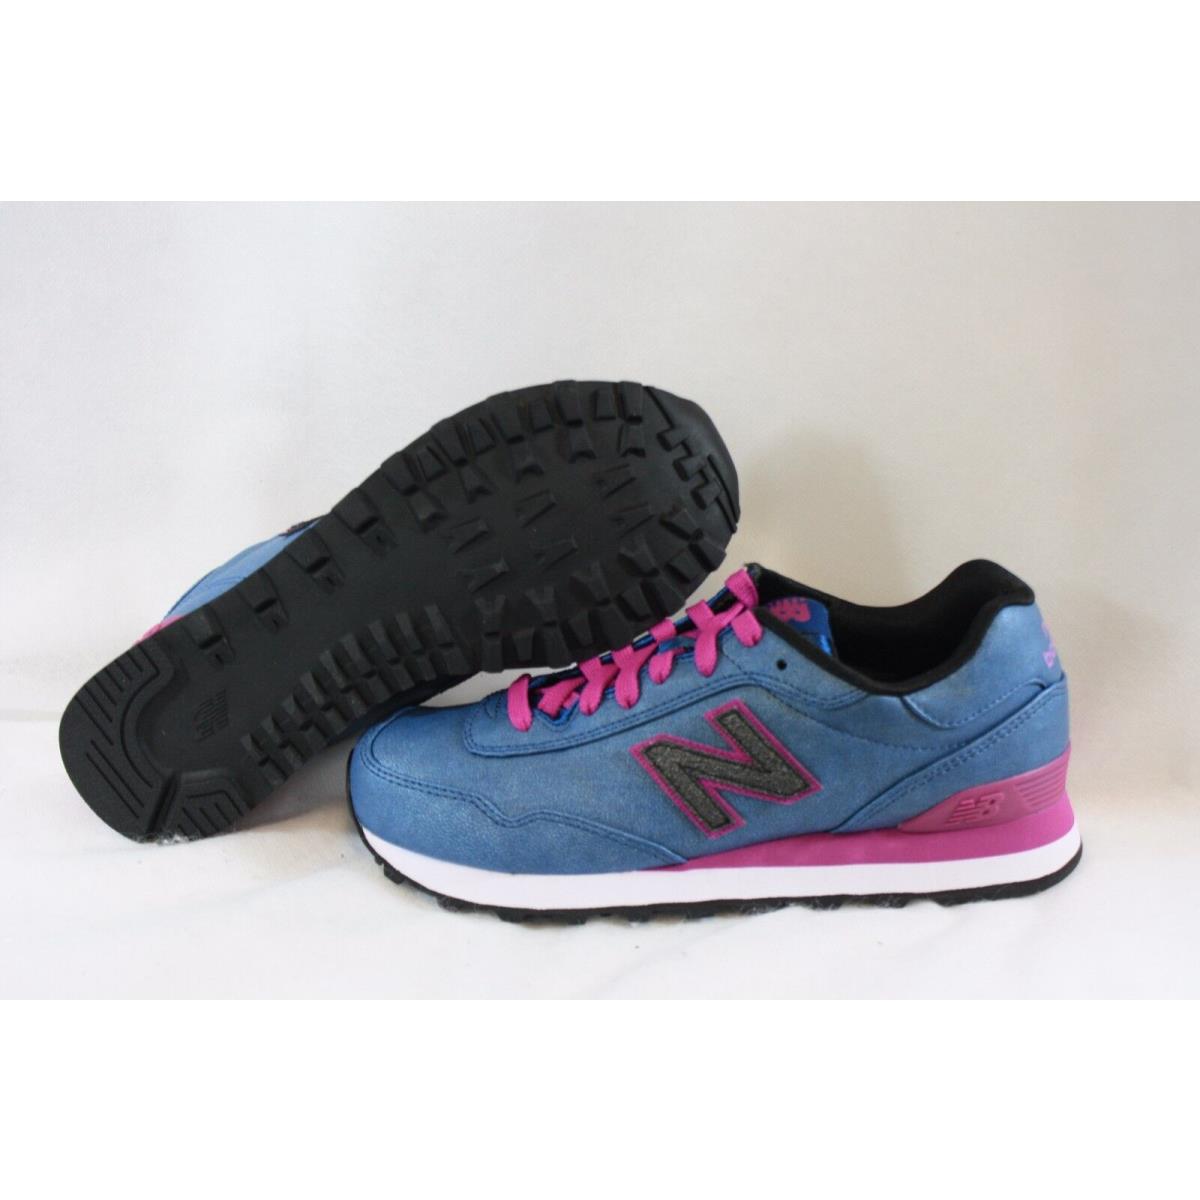 New Womens New Balance WL 515 Mbk Blue Lavender Classic Running Sneakers Shoes